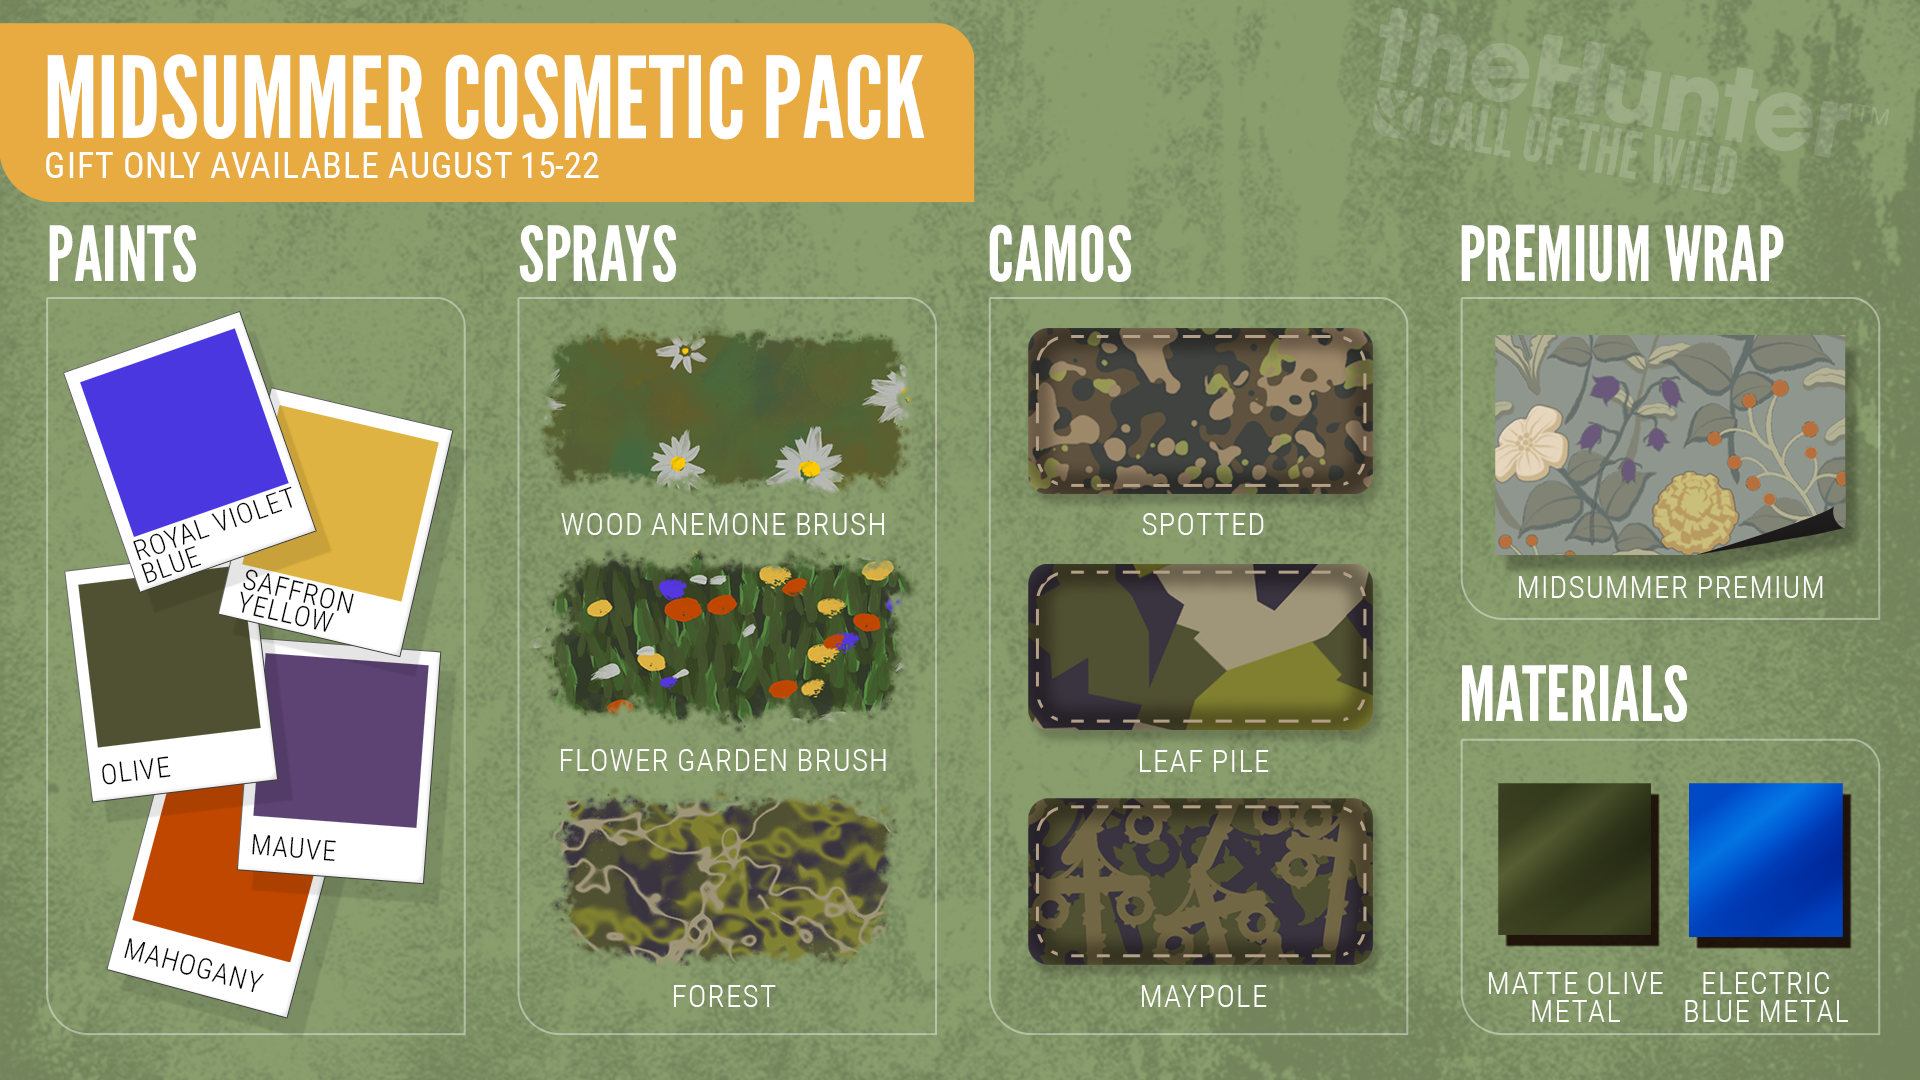 Available for a limited-time, get the Midsummer Cosmetic Pack before it disappears!